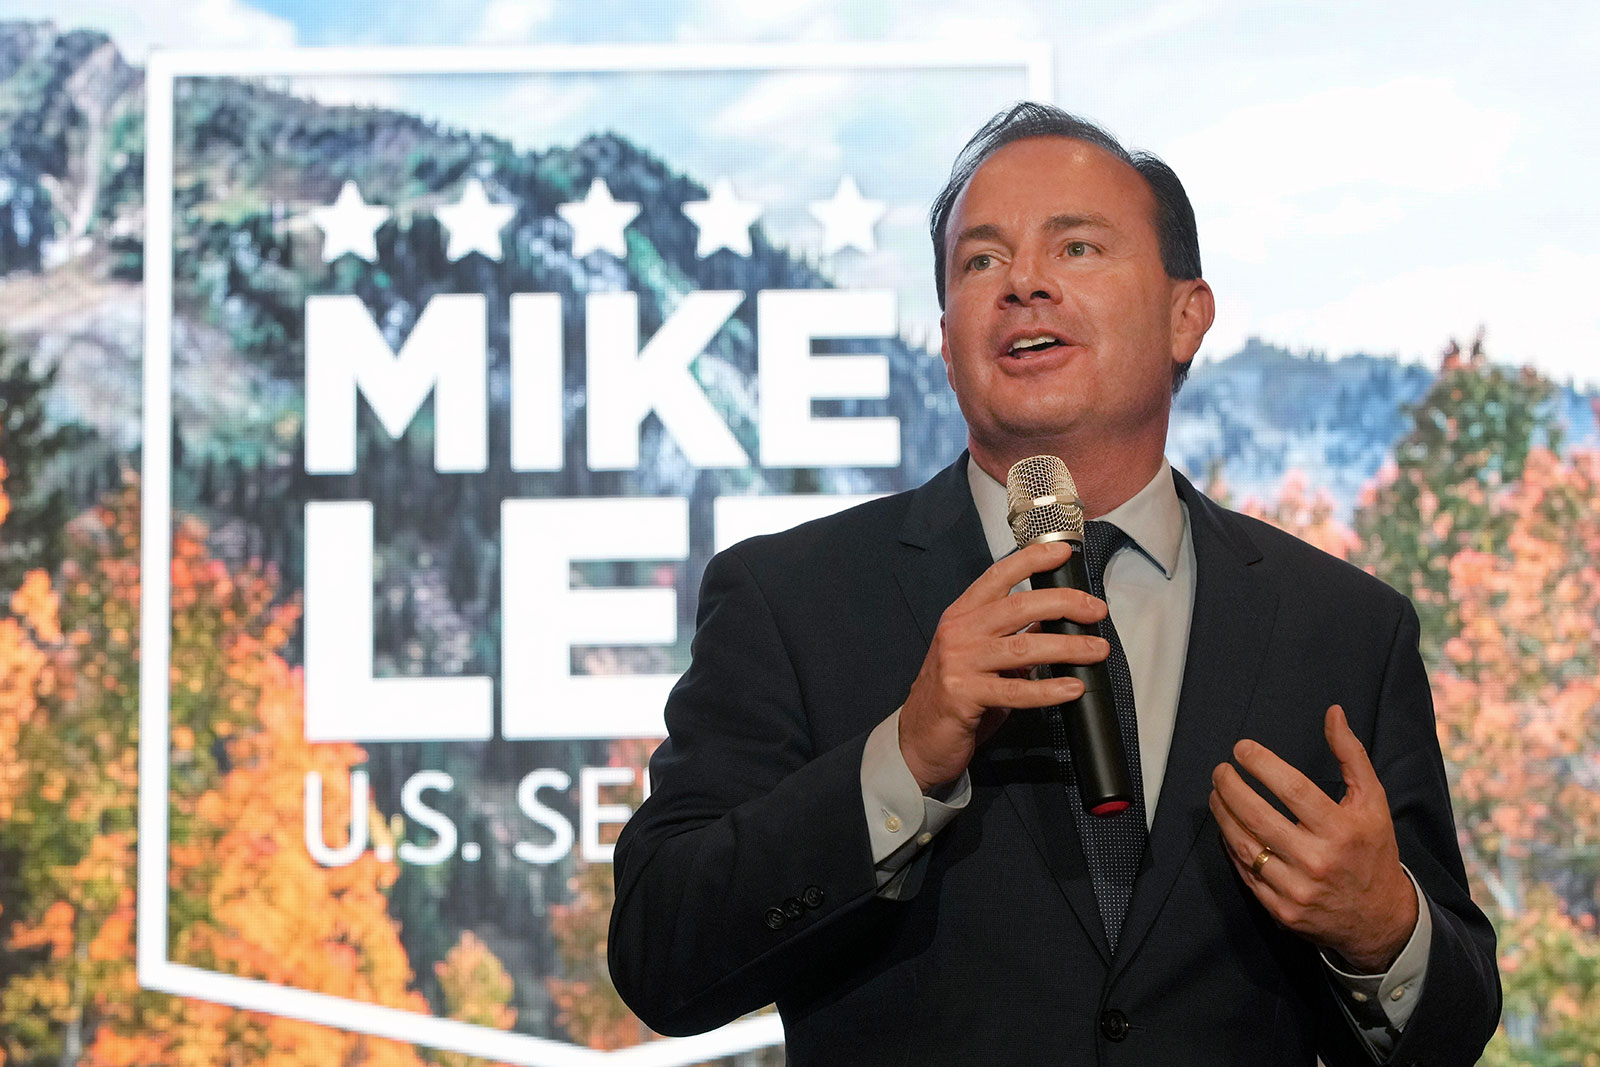 Sen. Mike Lee talks to supporters during an election night party on June 28 in South Jordan, Utah.